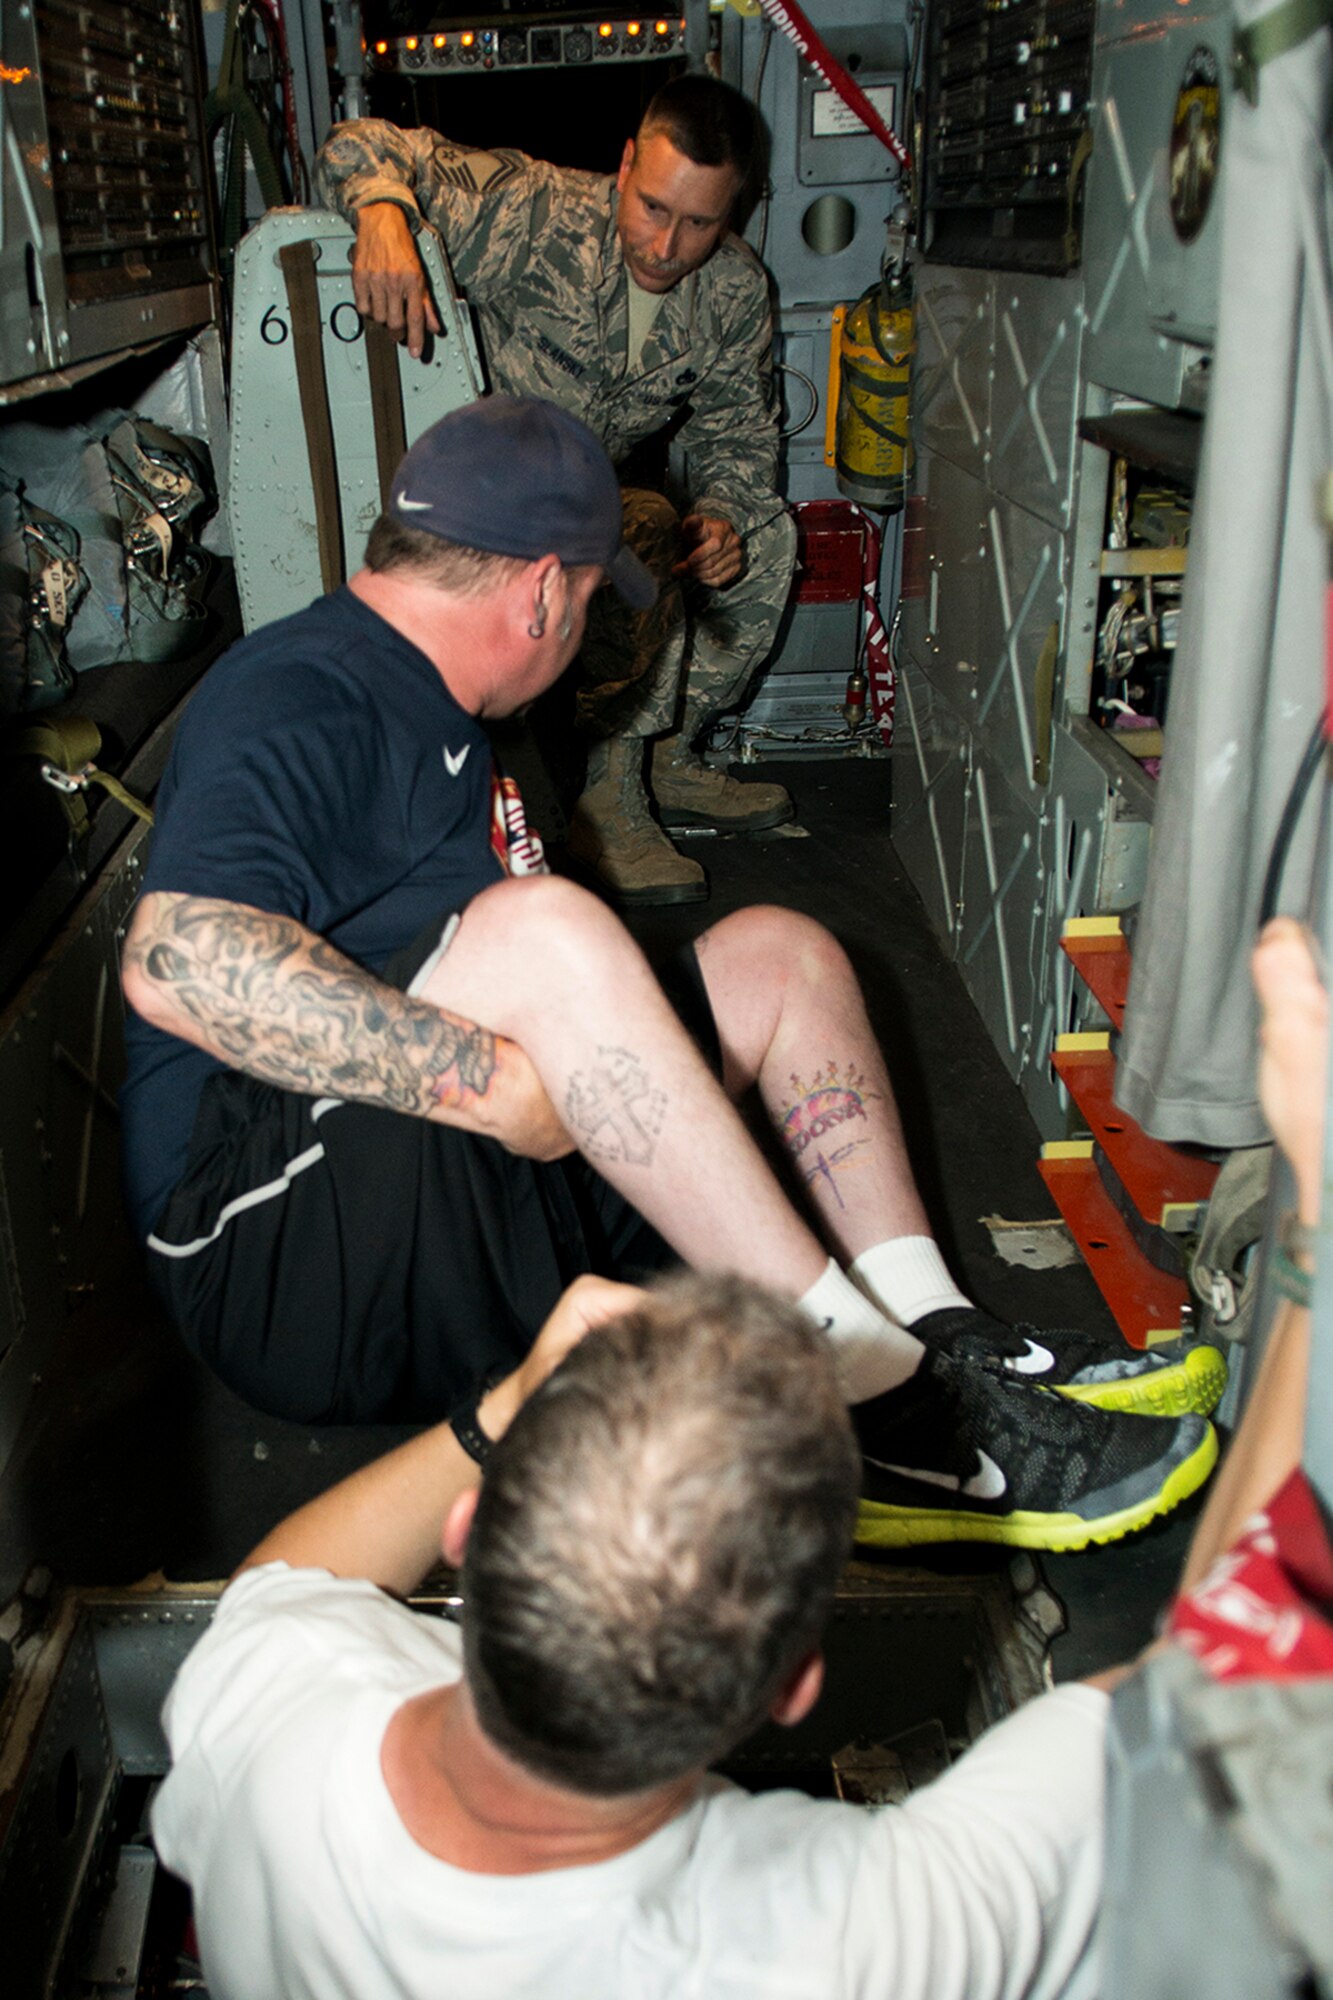 Patrick McDonald makes his way to the pilot's seat of a 307th Bomb Wing B-52H Stratofortress during a tour, June 4, 2014, Barksdale Air Force Base, La. McDonald, a U.S. Army veteran, was paralyzed in 1991 as the result of an accident while serving with the Army in South Korea, joined the American300 Tours to share his experience with fellow military service members as part of the tour's 'Never Quit Series'. (U.S. Air Force photo by Master Sgt. Greg Steele/Released)